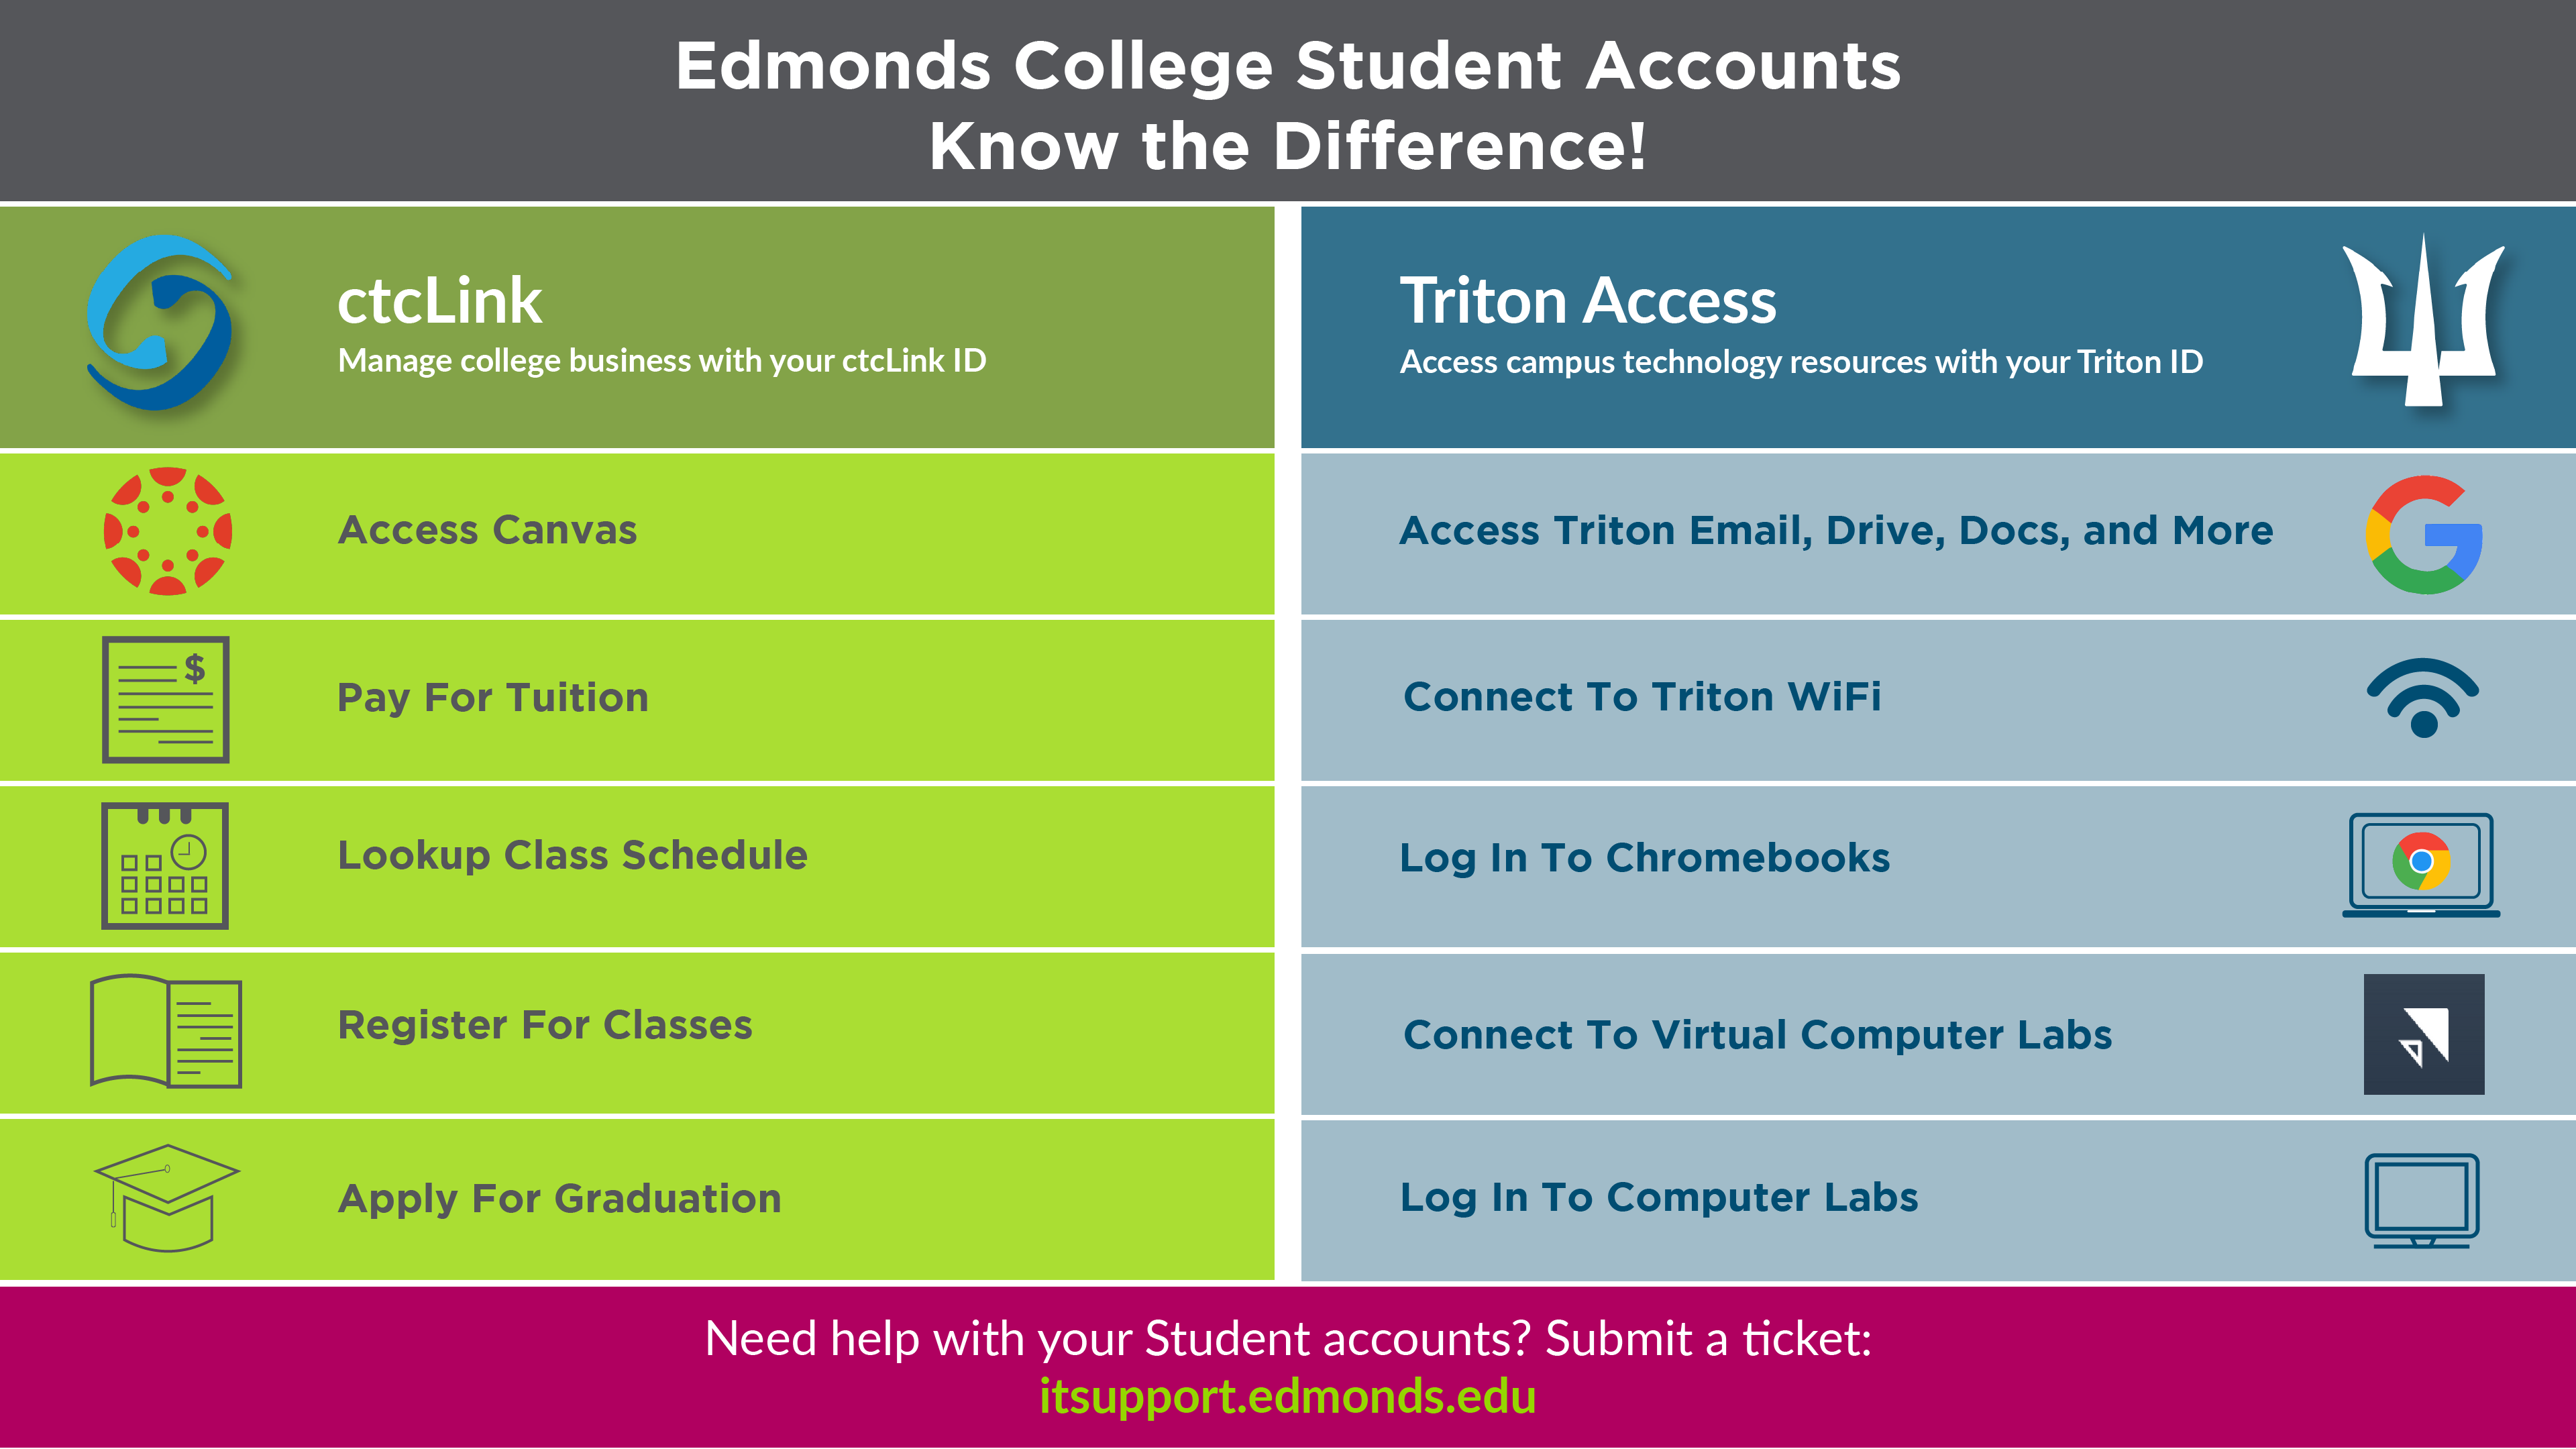 Each ID will allow students to access different college services